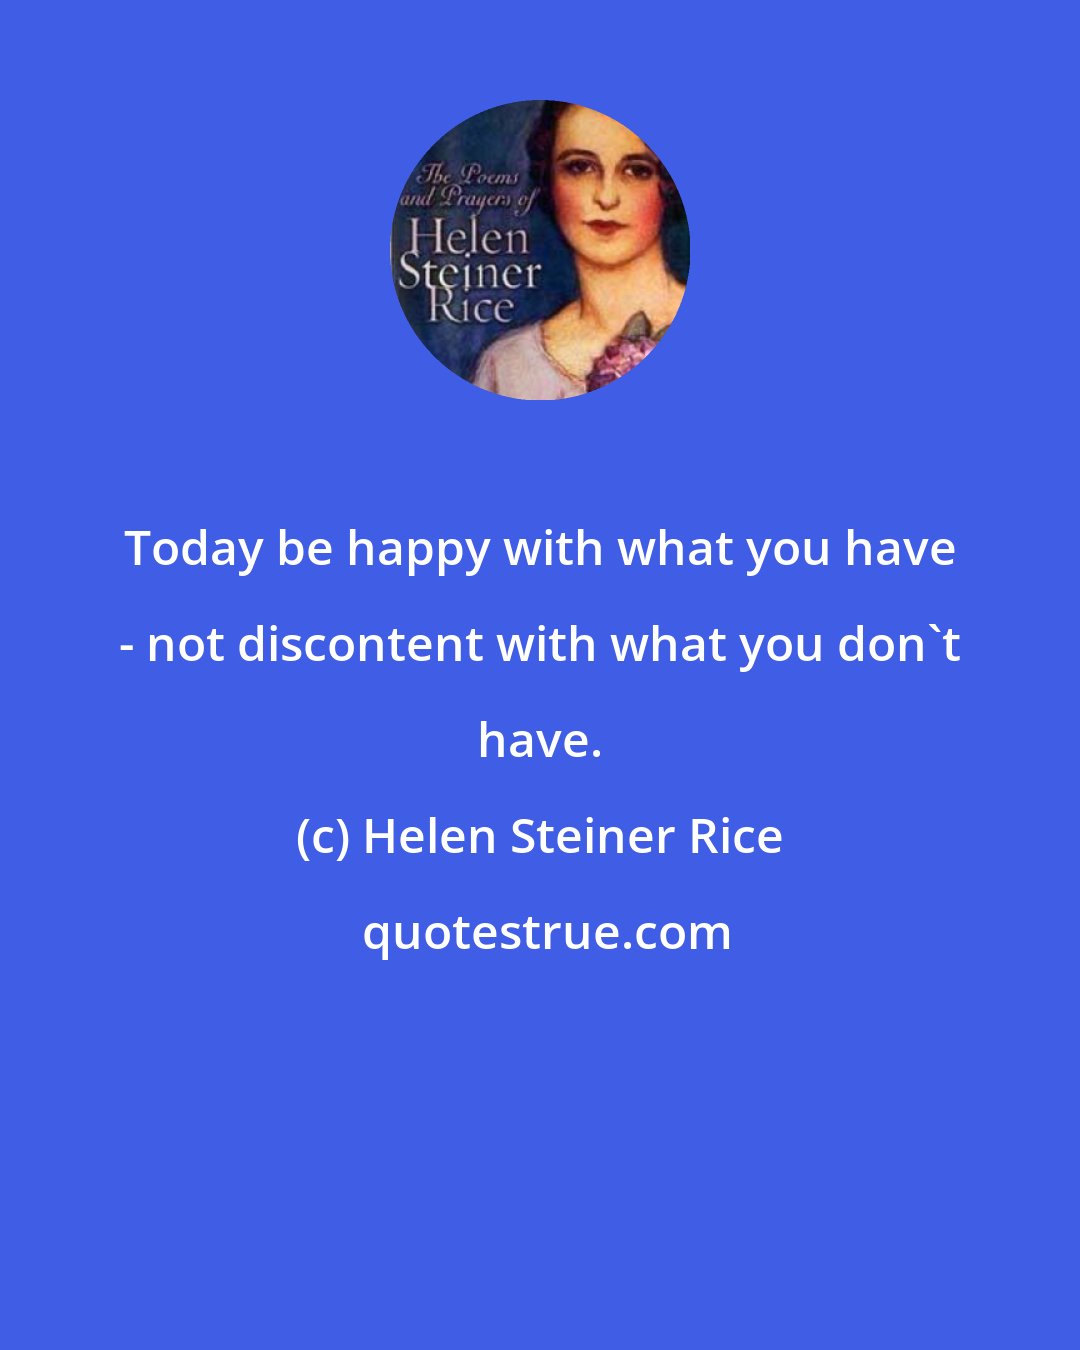 Helen Steiner Rice: Today be happy with what you have - not discontent with what you don't have.